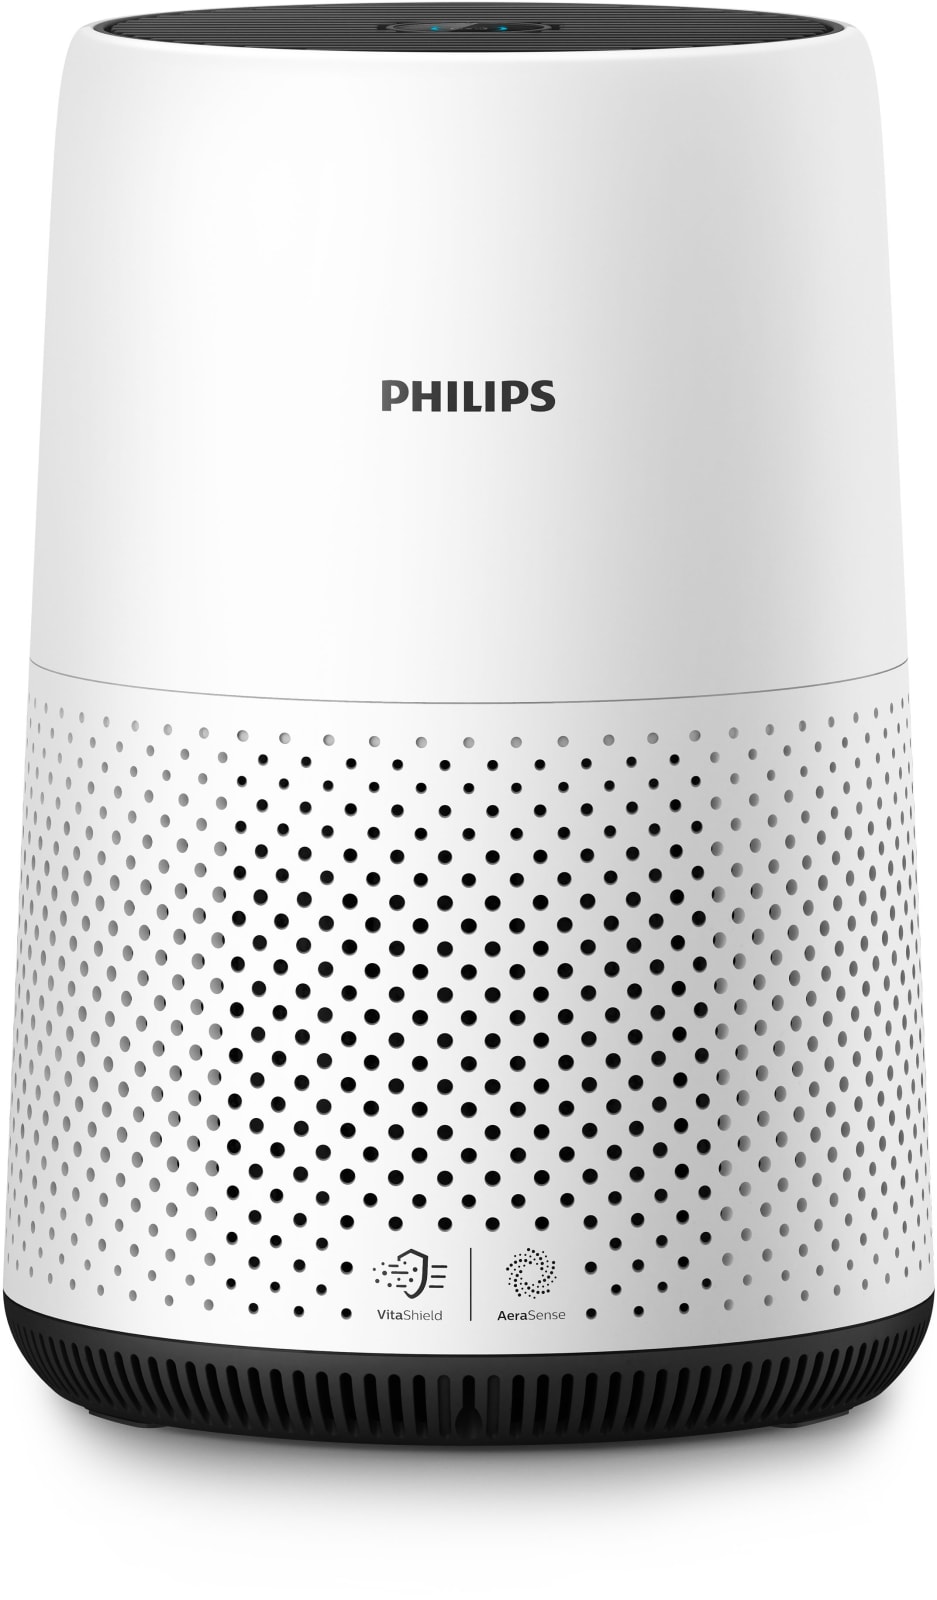 bleek Compliment Kinderpaleis Air Purifier Series 800, Philips Experience Design / The Netherlands | DFA  Awards Online Showcase